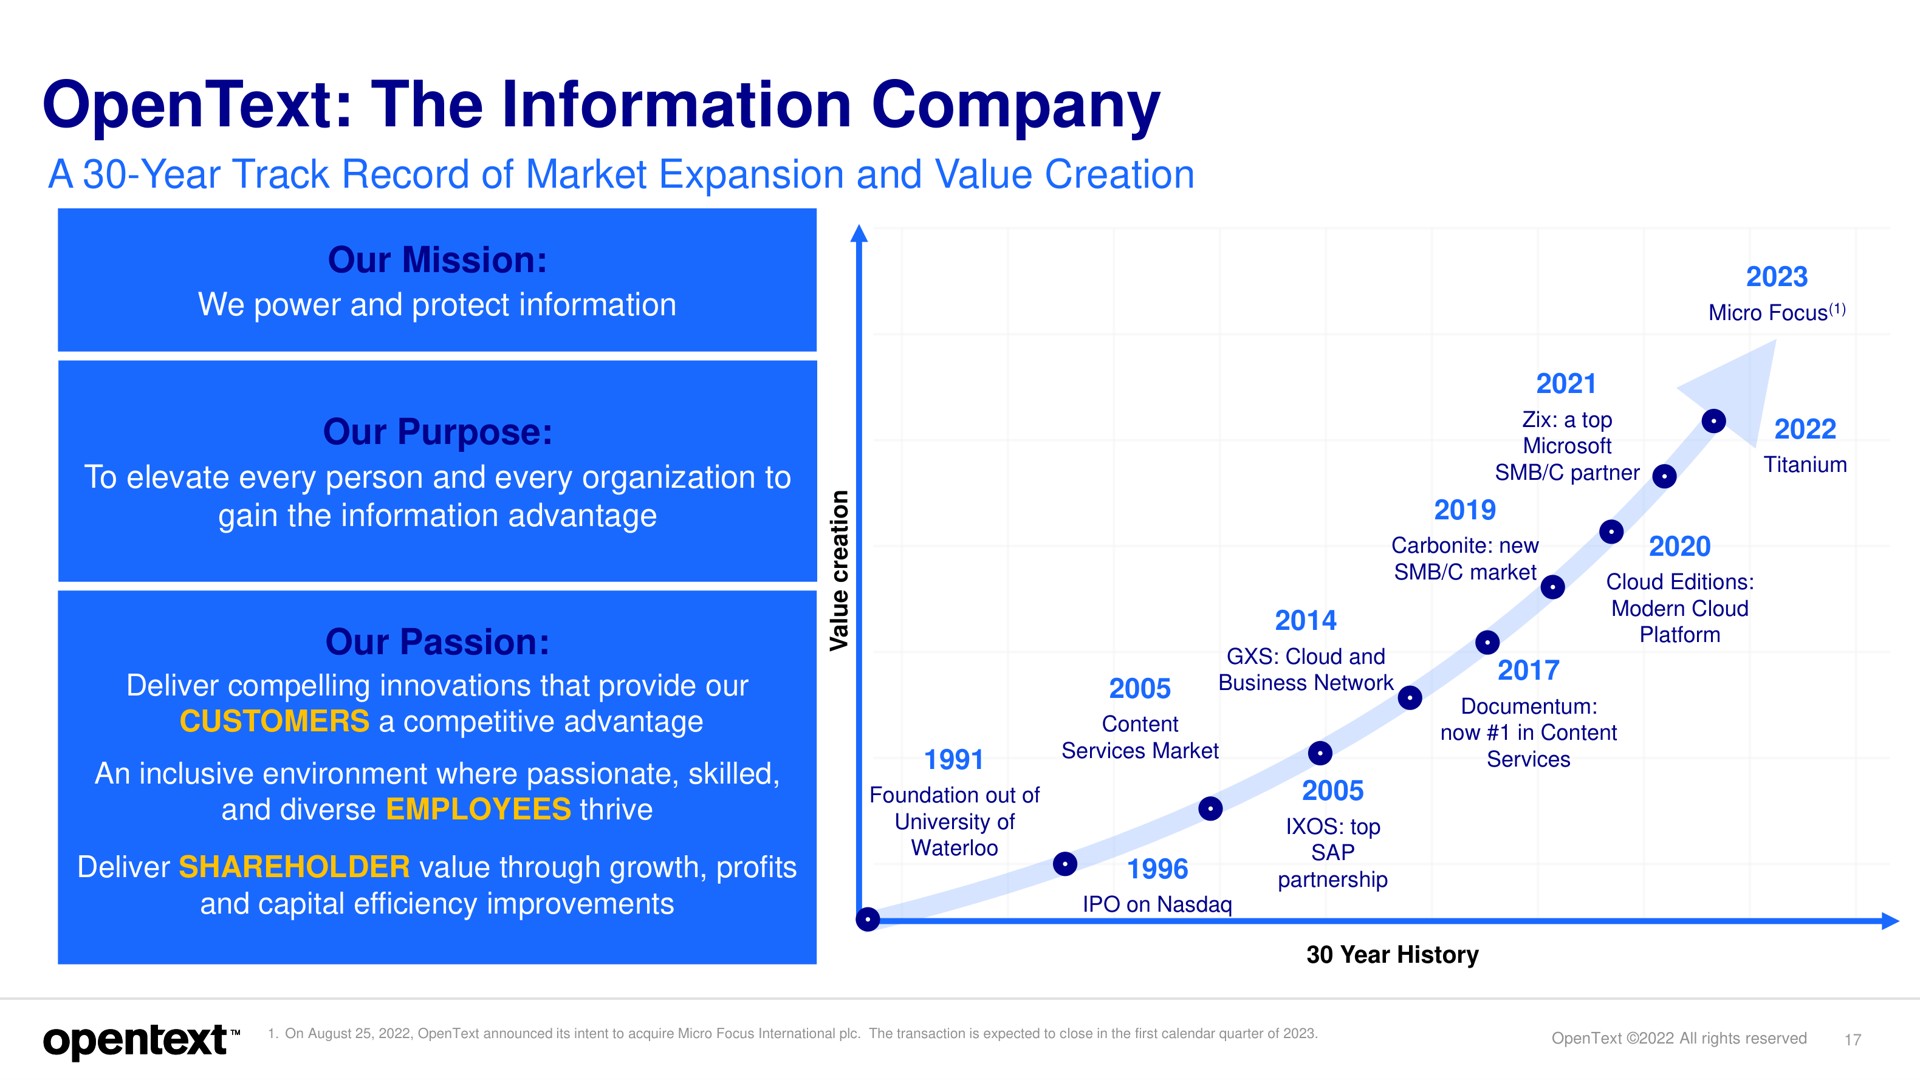 the information company | OpenText